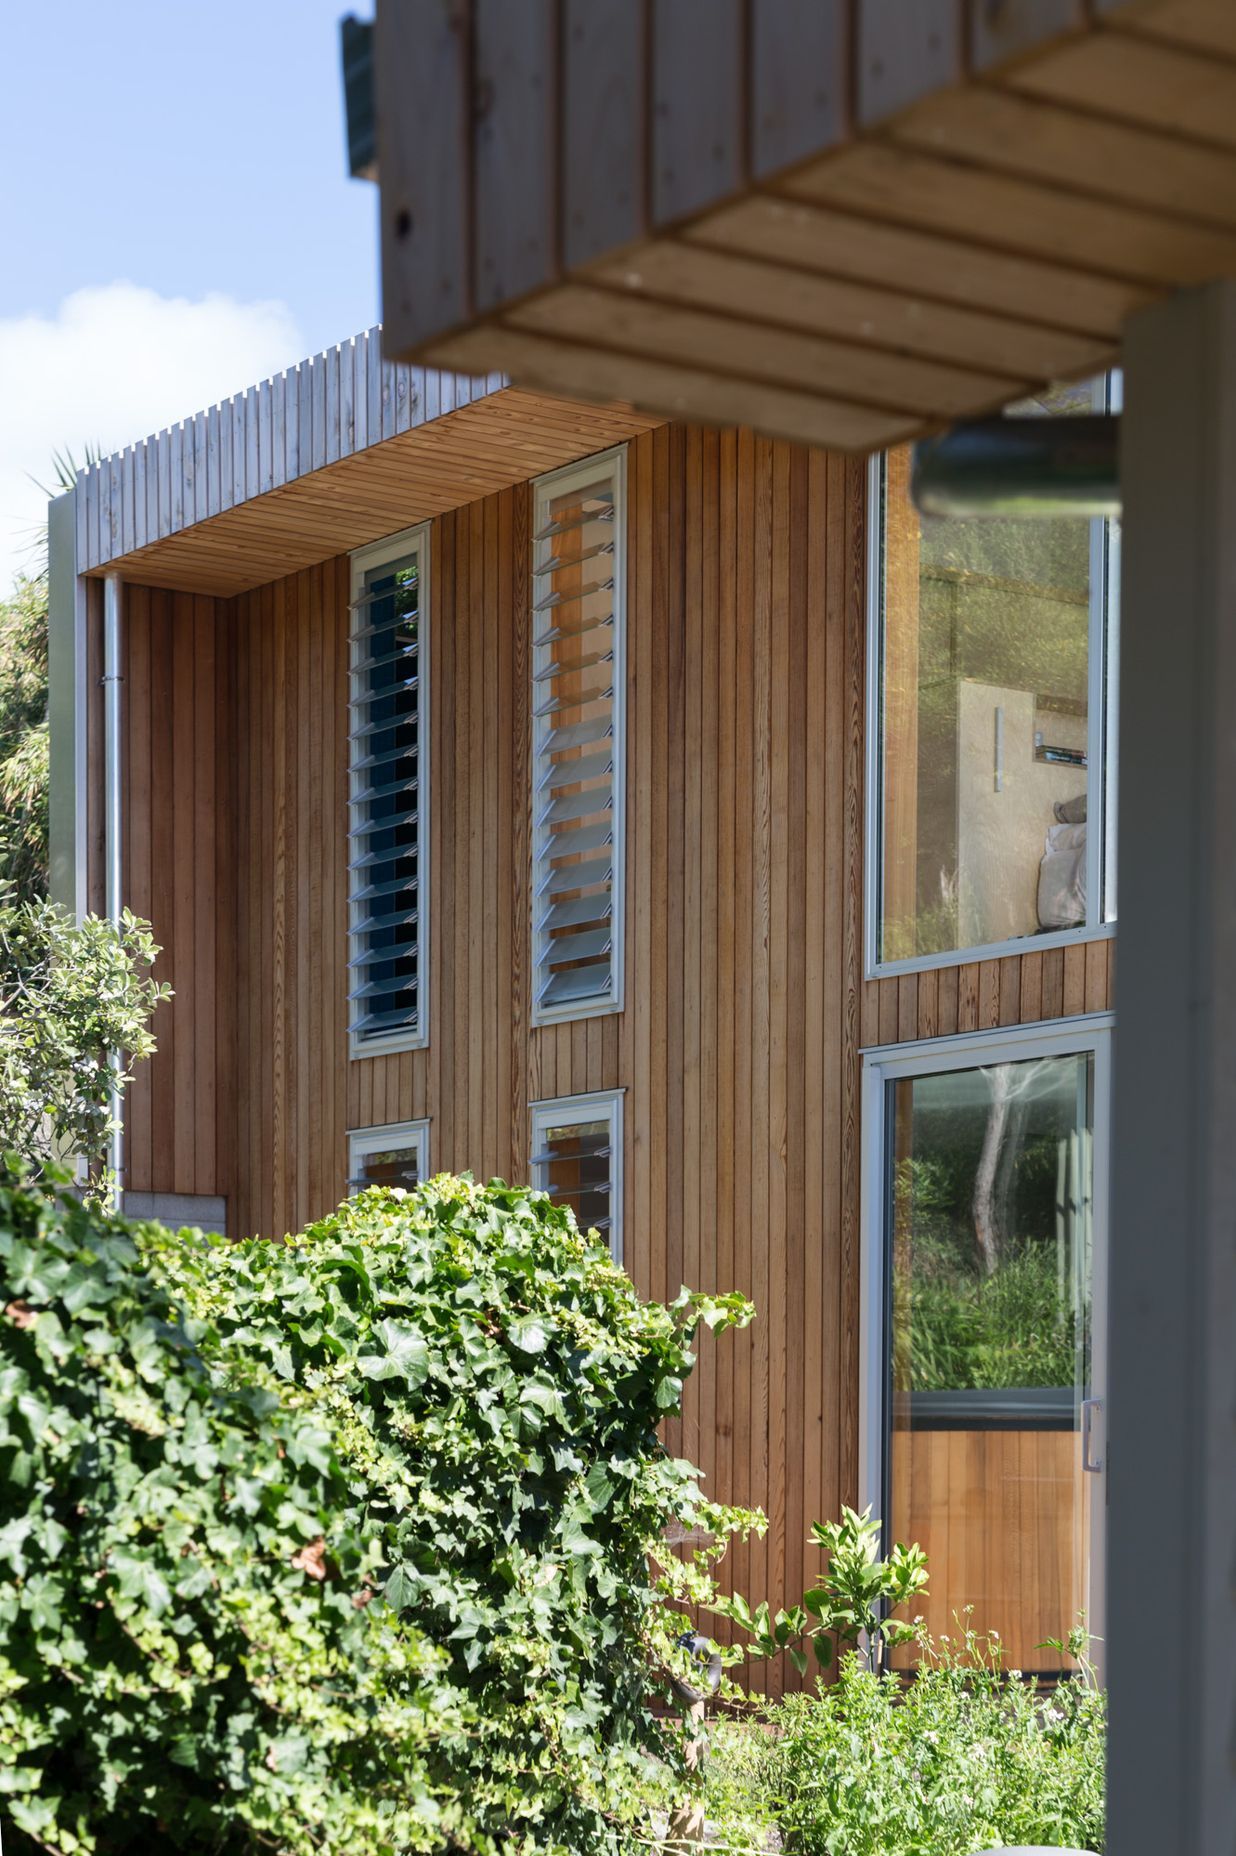 Vertical cedar cladding makes for a contemporary addition to the bevelled weatherboards of the original cottage.